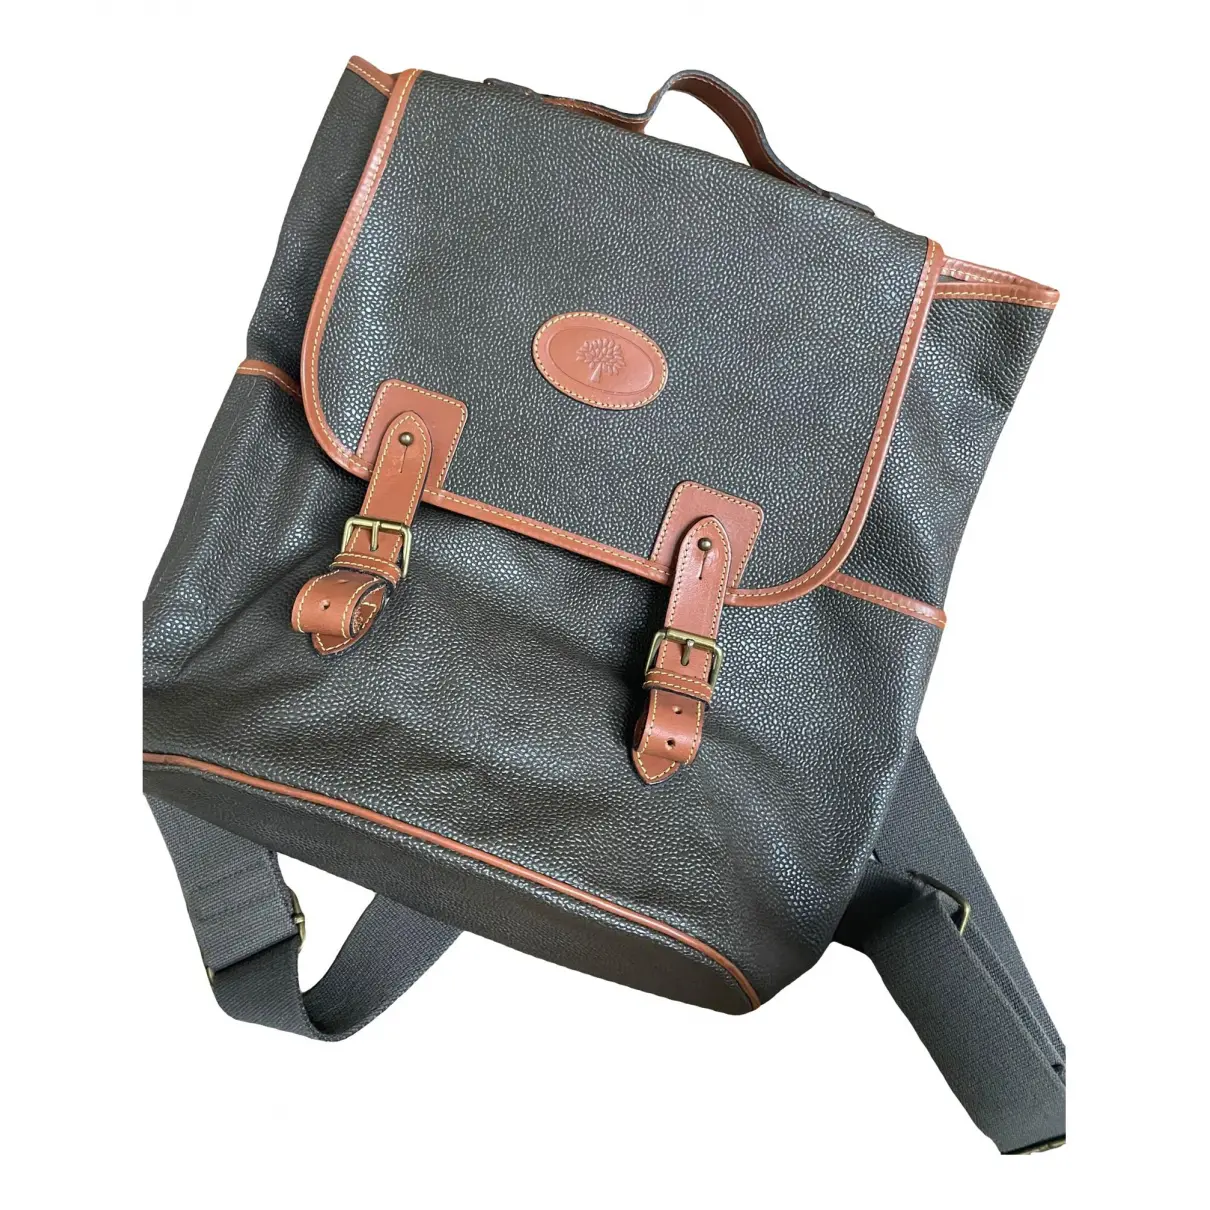 Heritage leather backpack